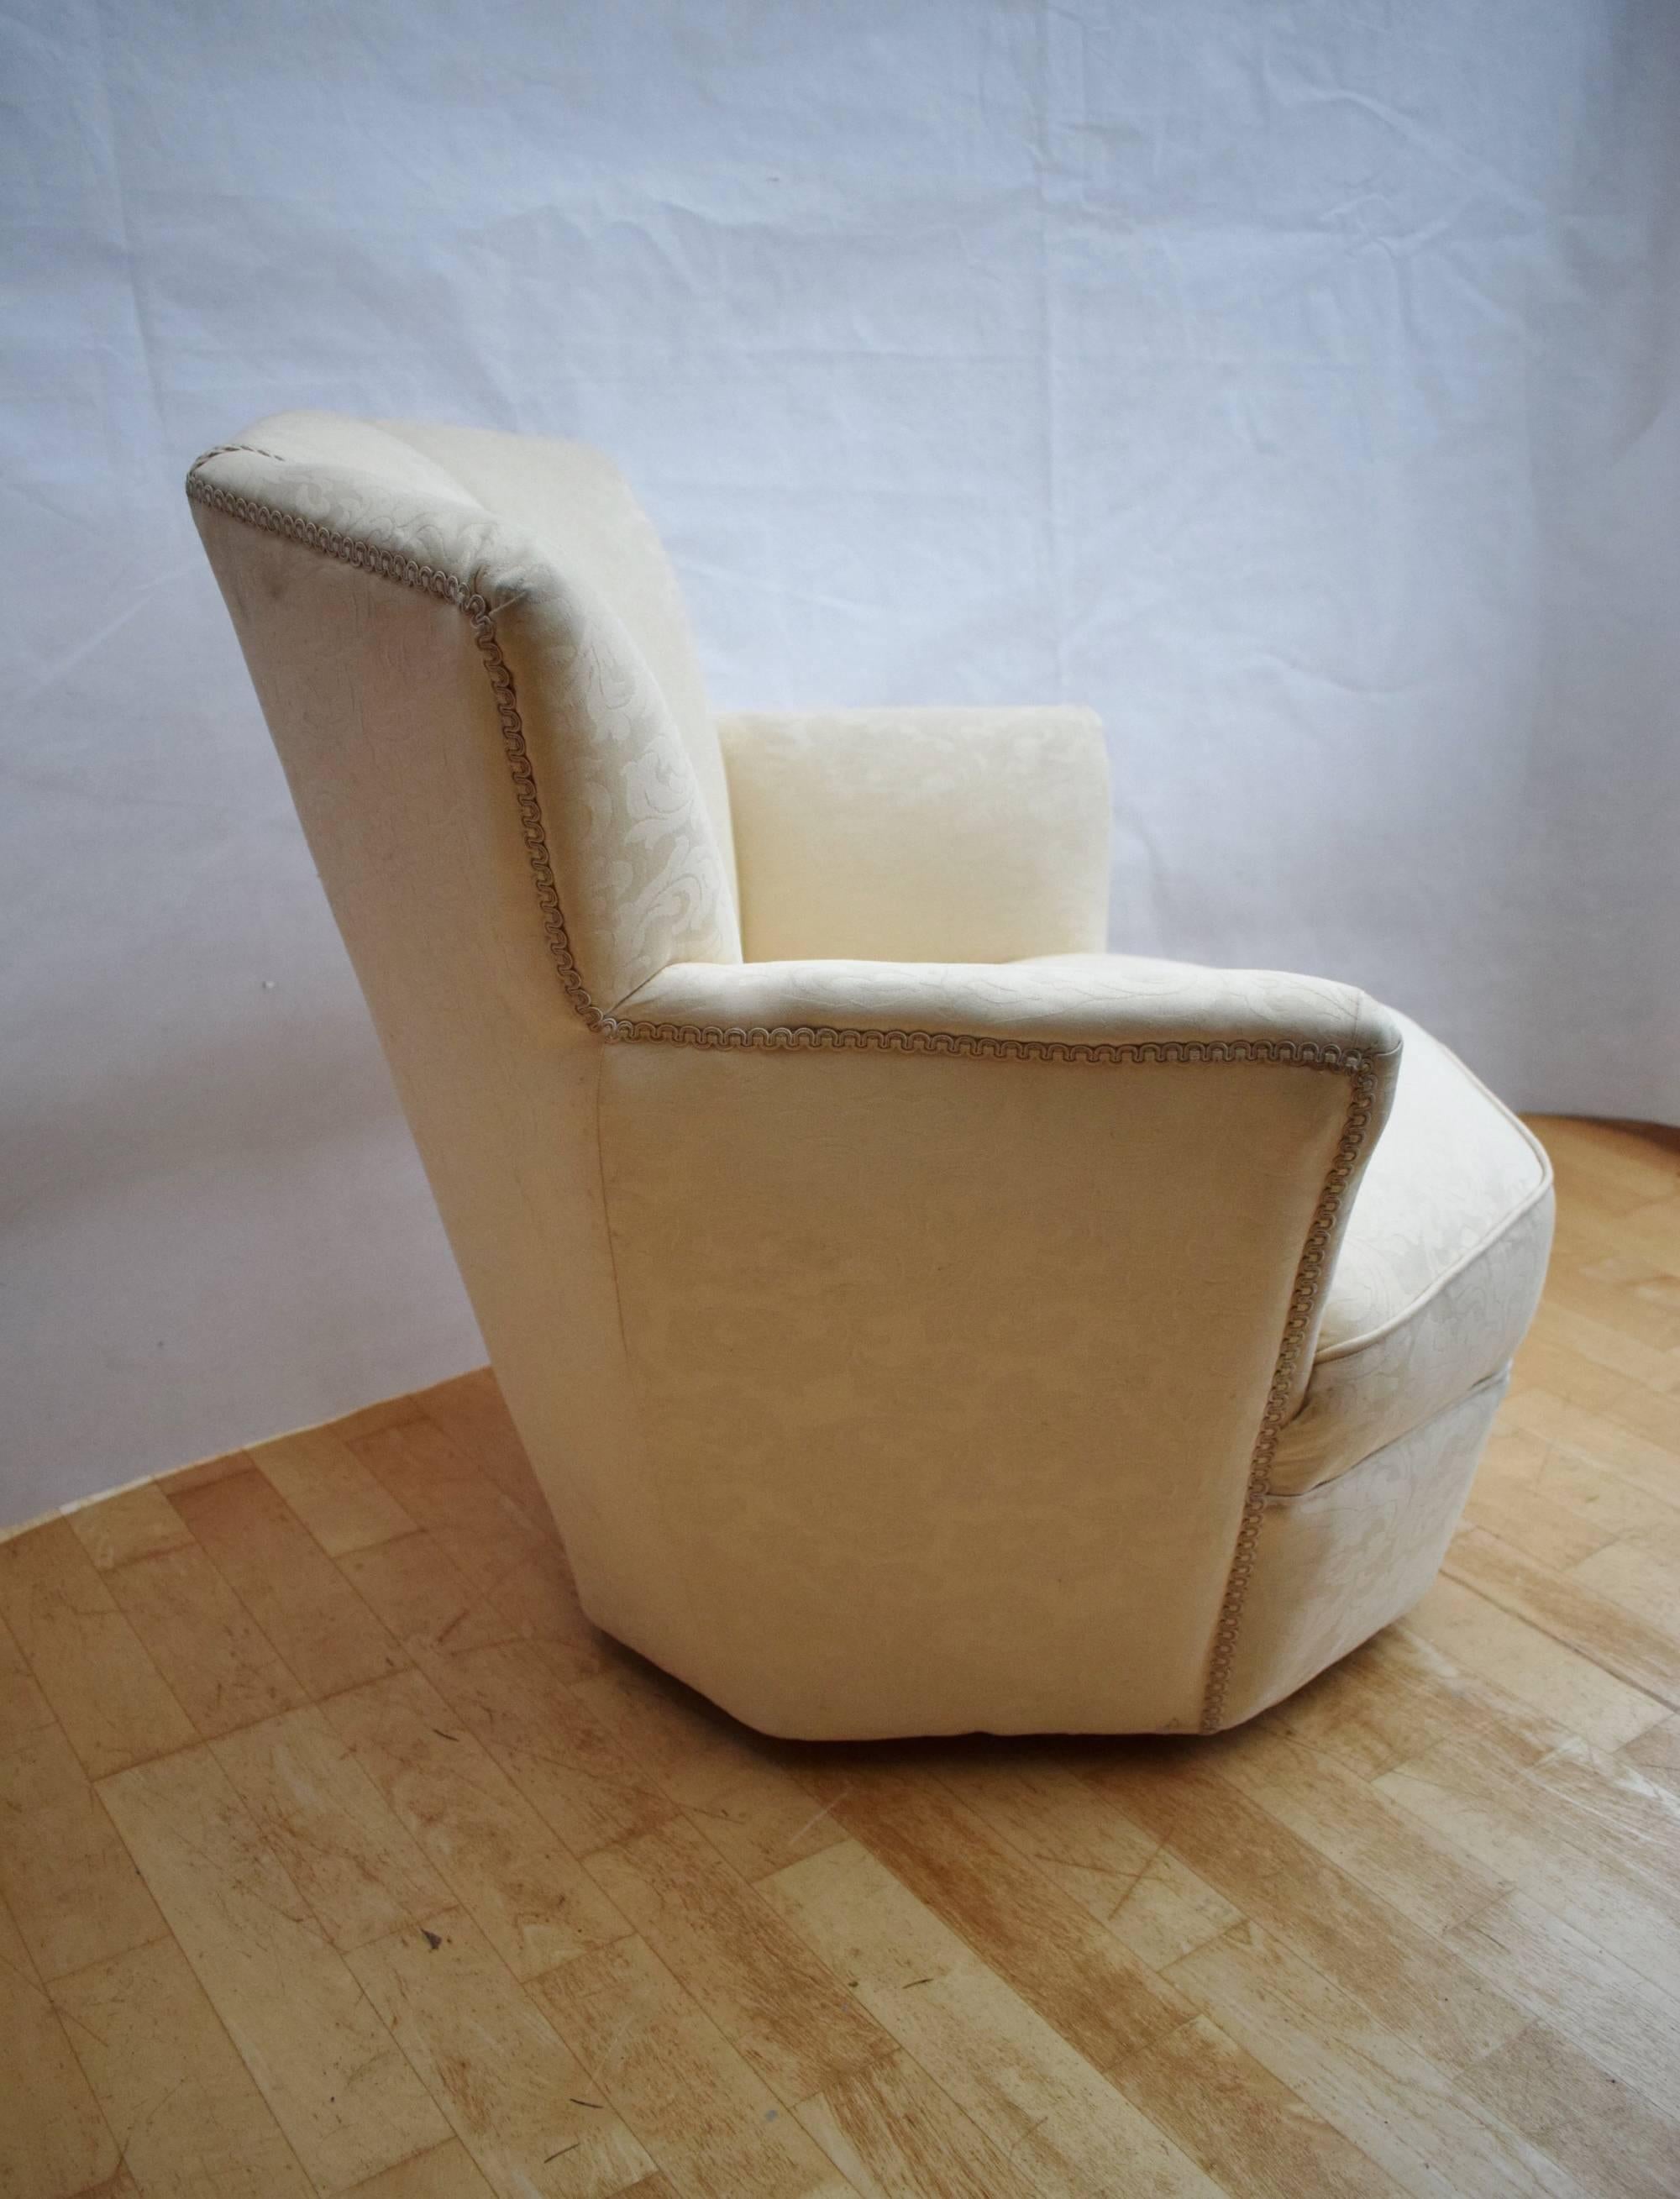 European Art Deco Antique Cocktail Chair Upholstered in Cream Heavy Cotton Damask